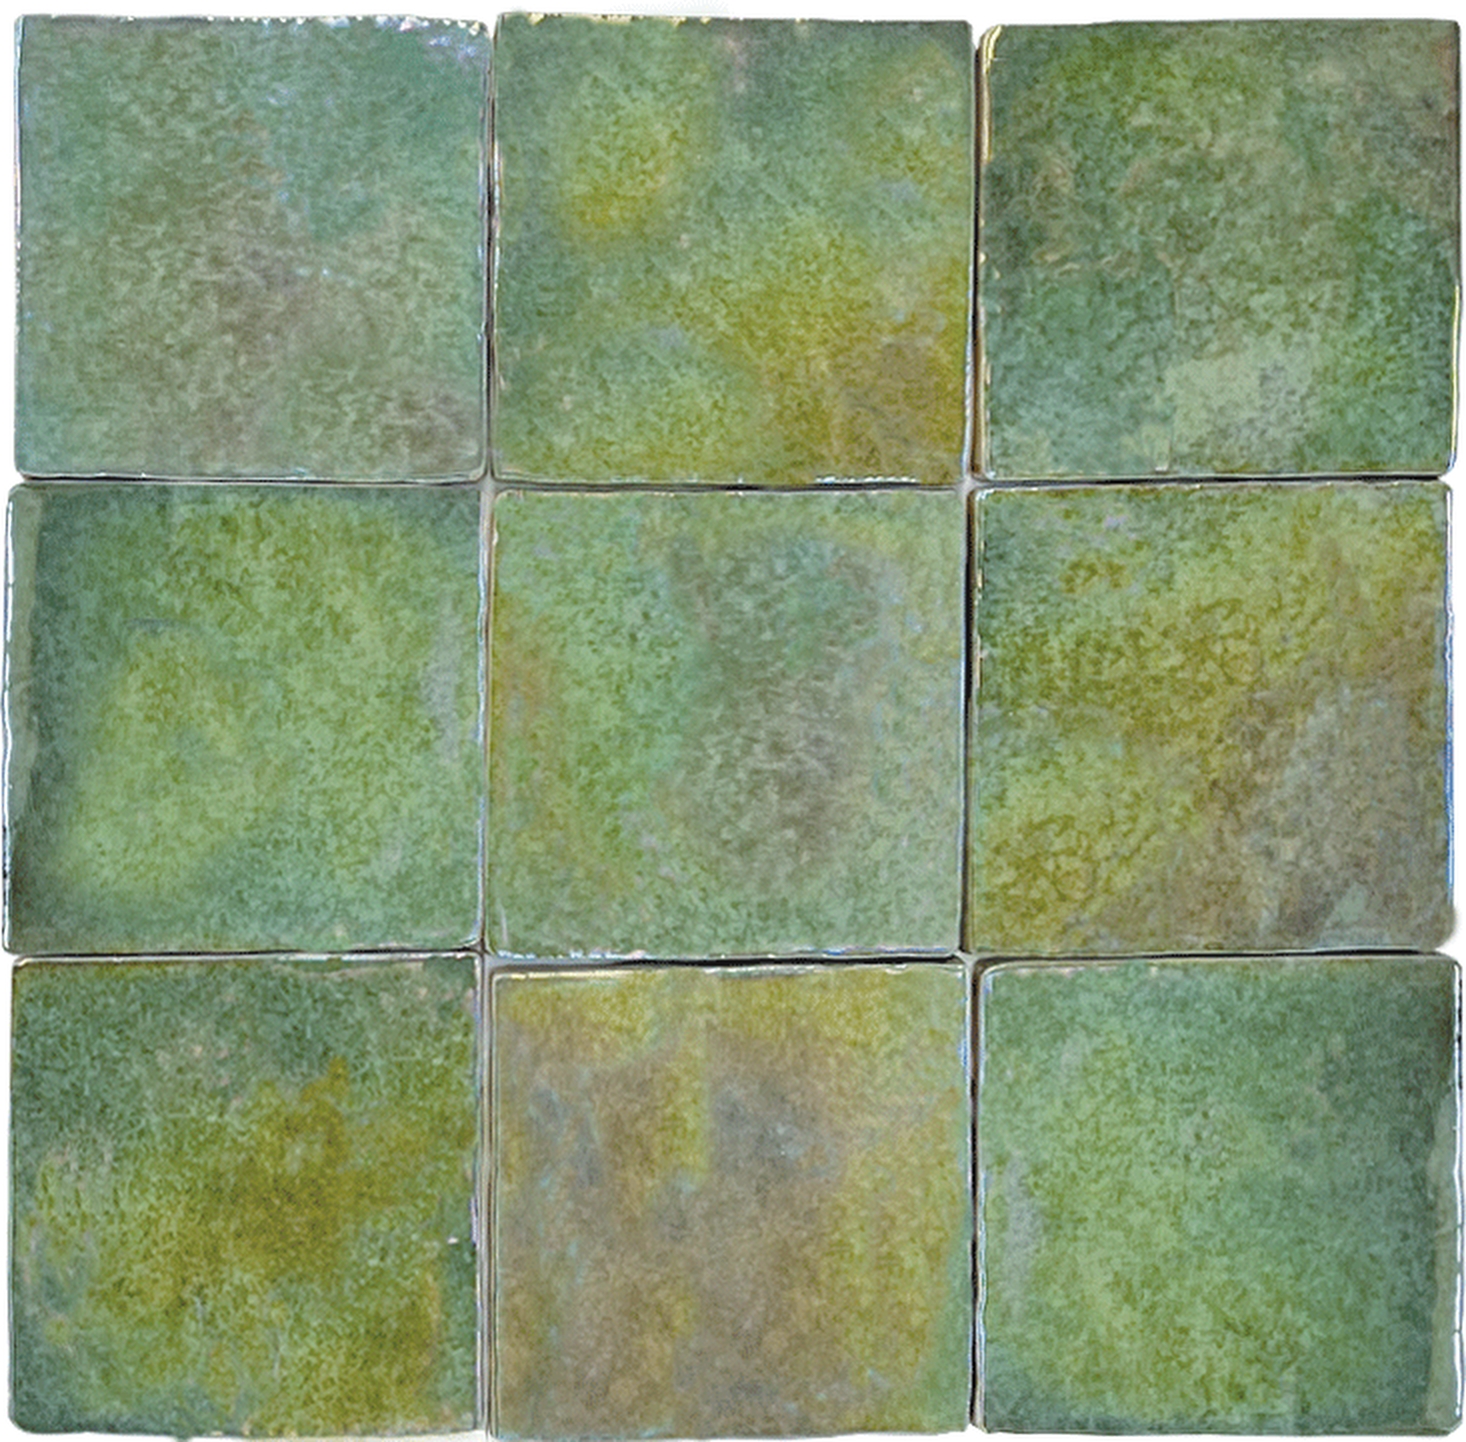 Square wall tiles with iridescent effect and shade variations